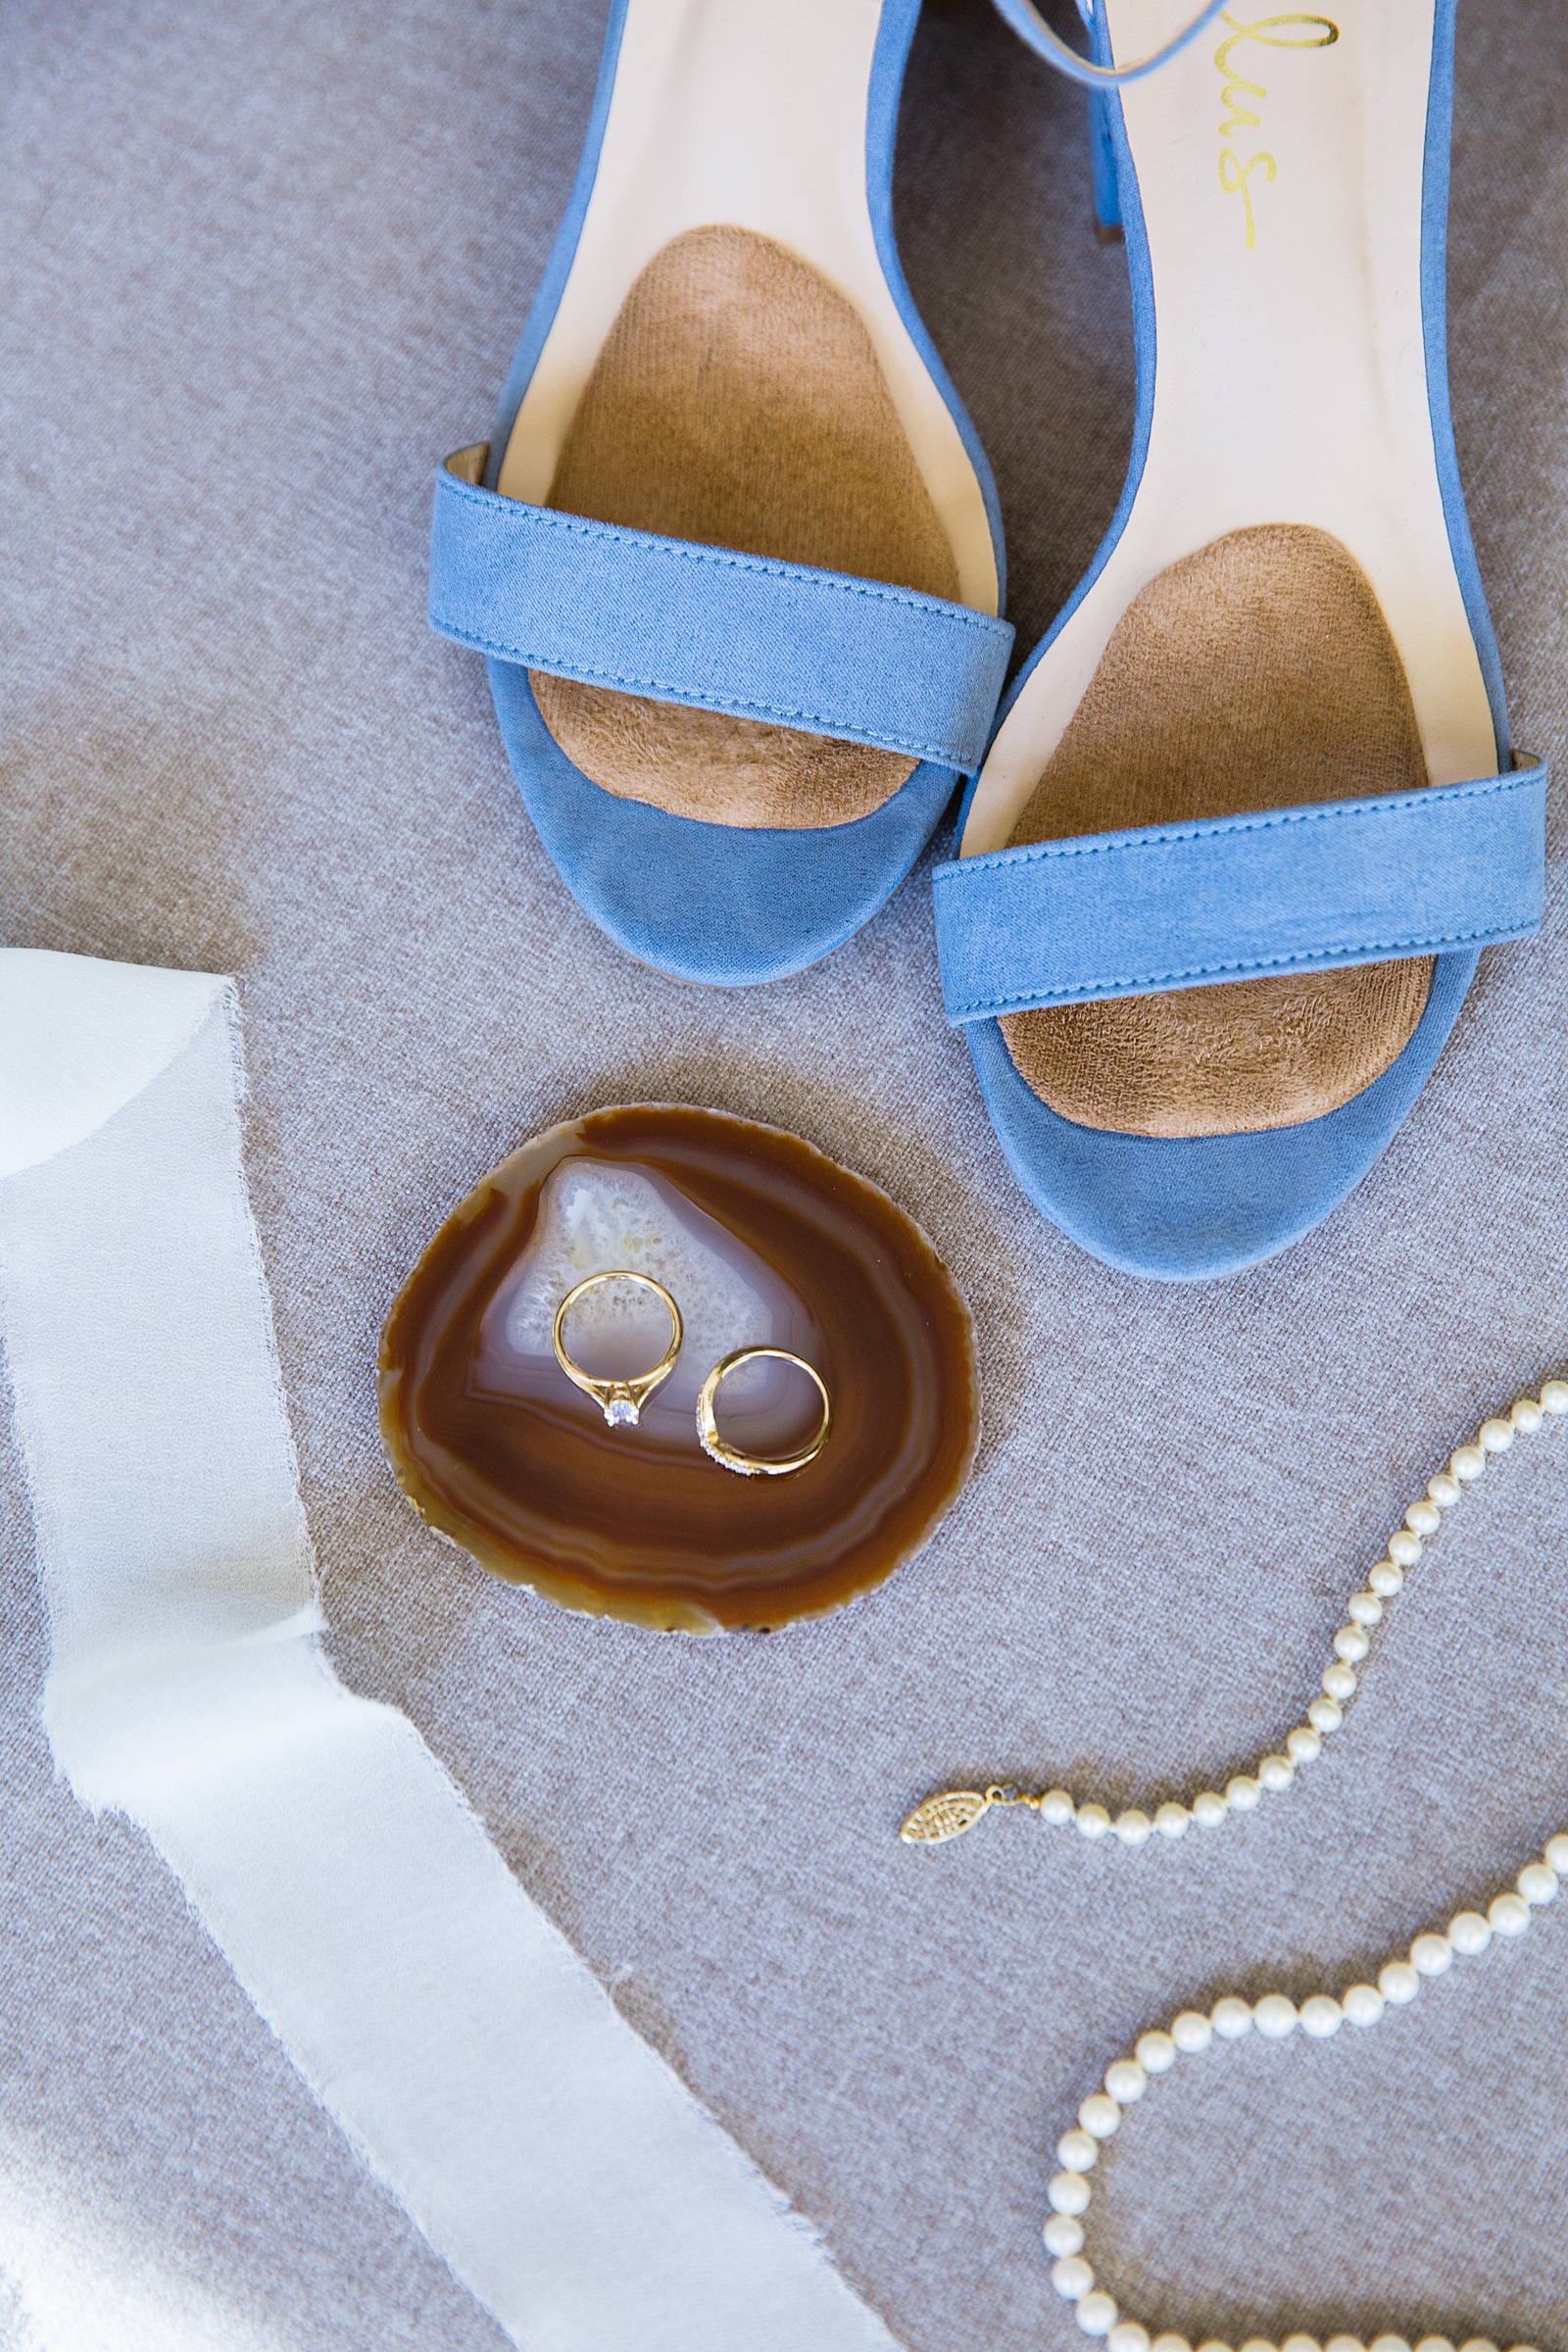 Brides's wedding day details of pearls and light blue shoes by PMA Photography.